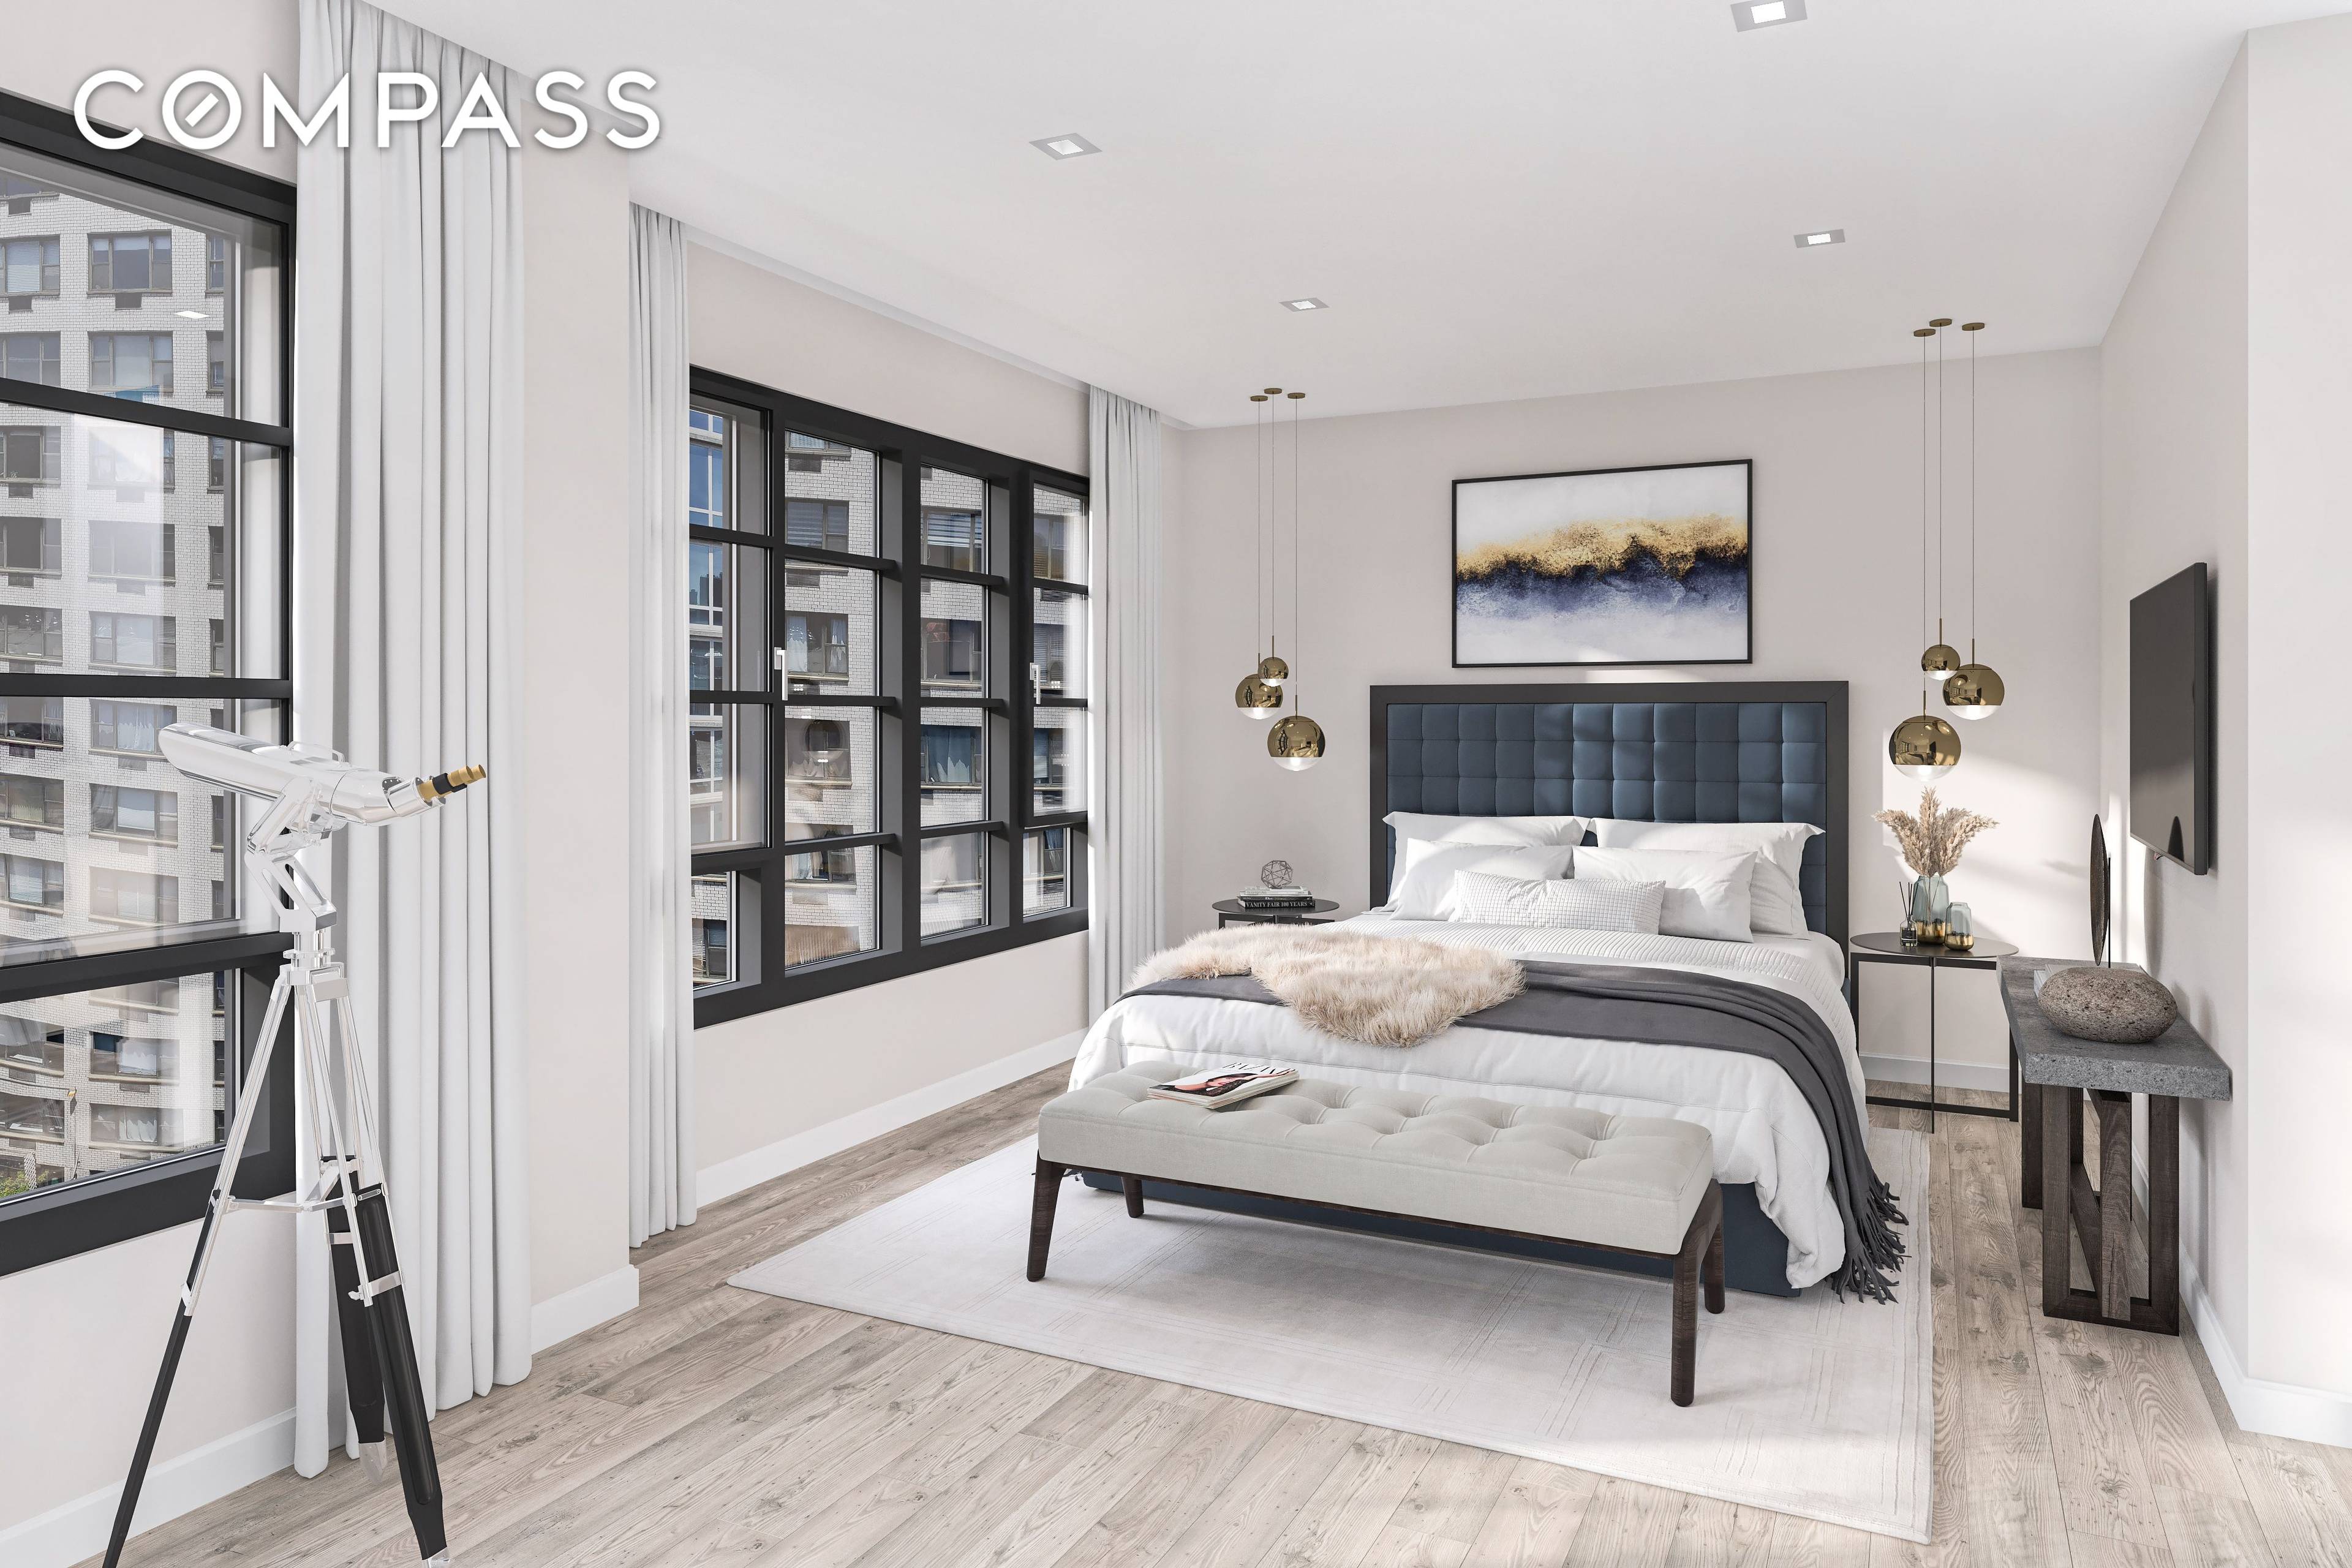 Introducing The Gramercy Gates, a new boutique condominium designed by Philip Johnson Alan Ritchie Architects, perfectly situated steps from the Flatiron, Nomad, East Village, Greenwich Village and Chelsea neighborhoods.